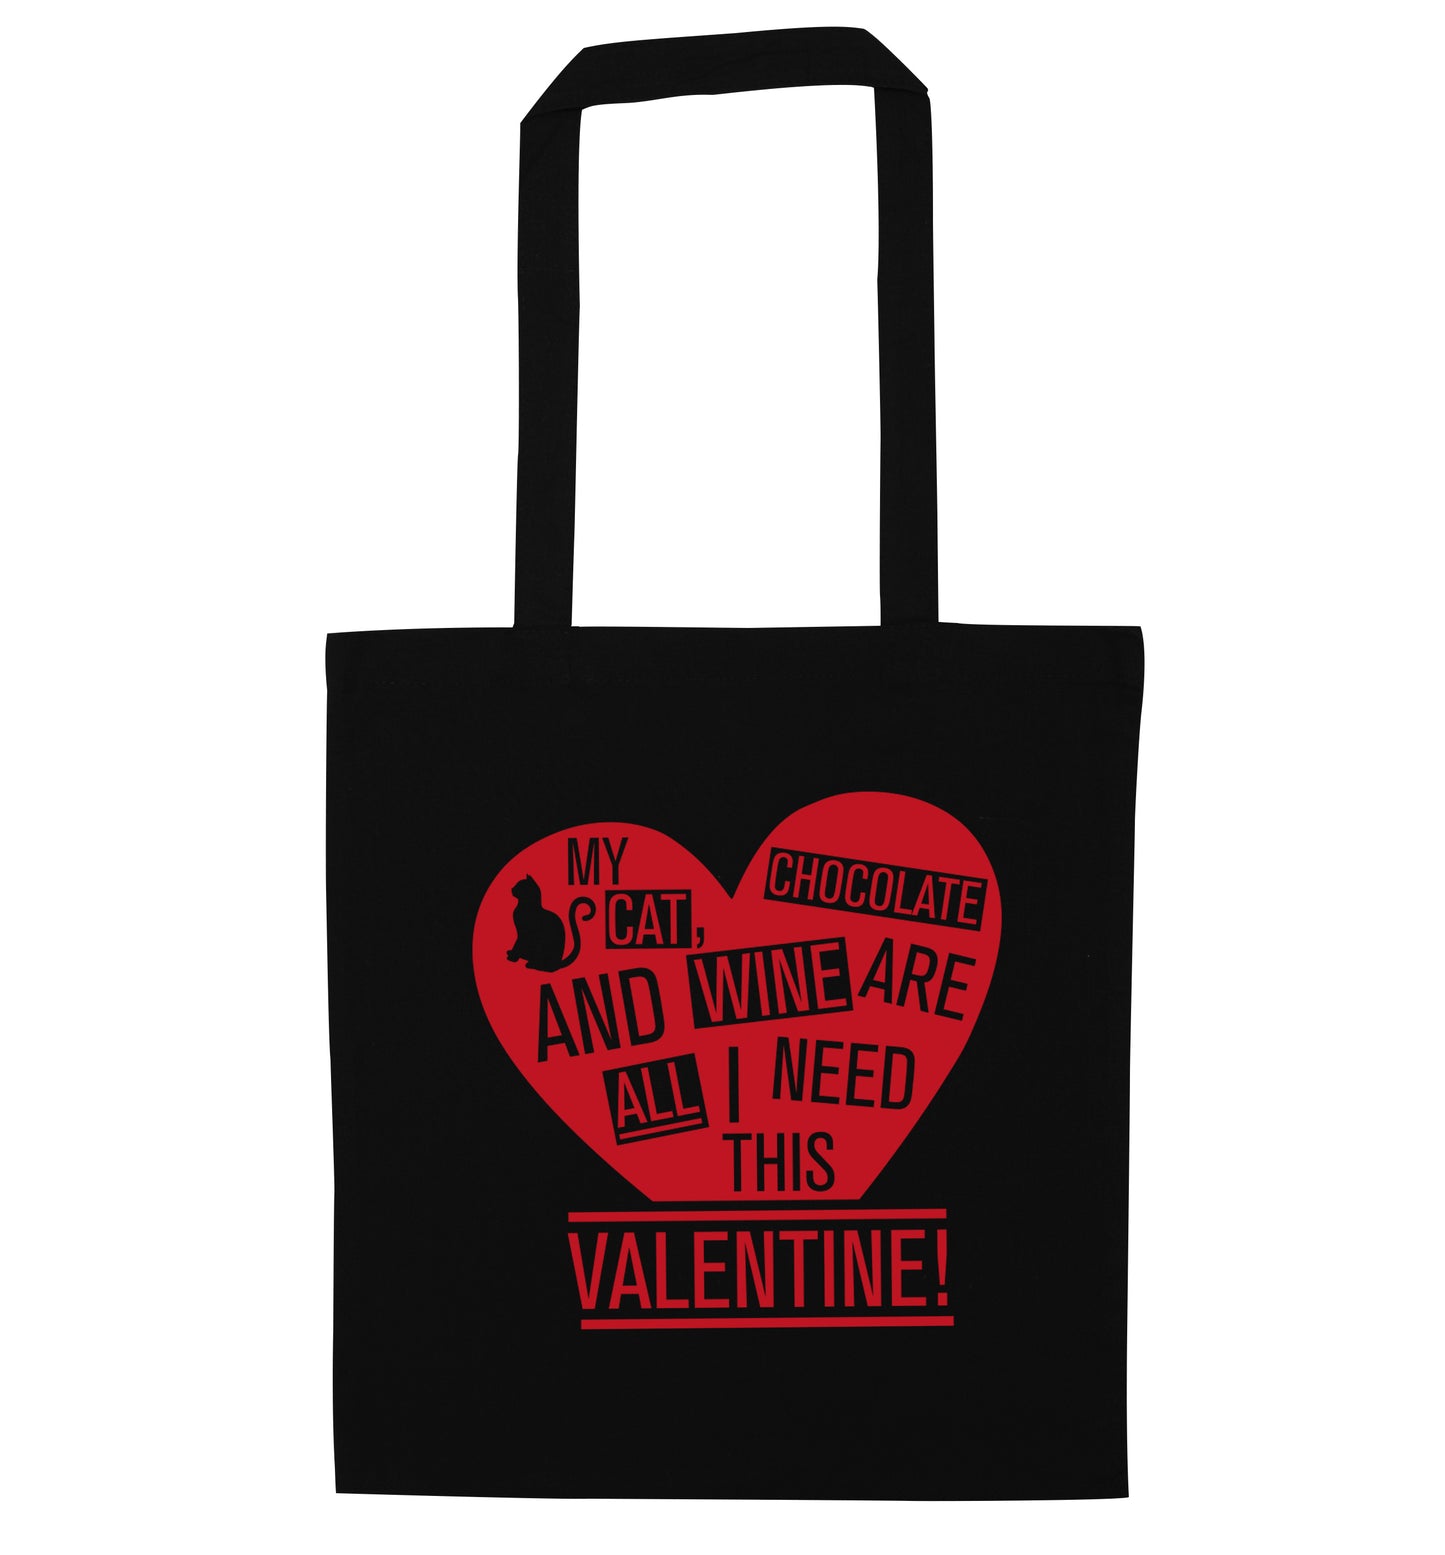 My cat, chocolate and wine are all I need this valentine! black tote bag